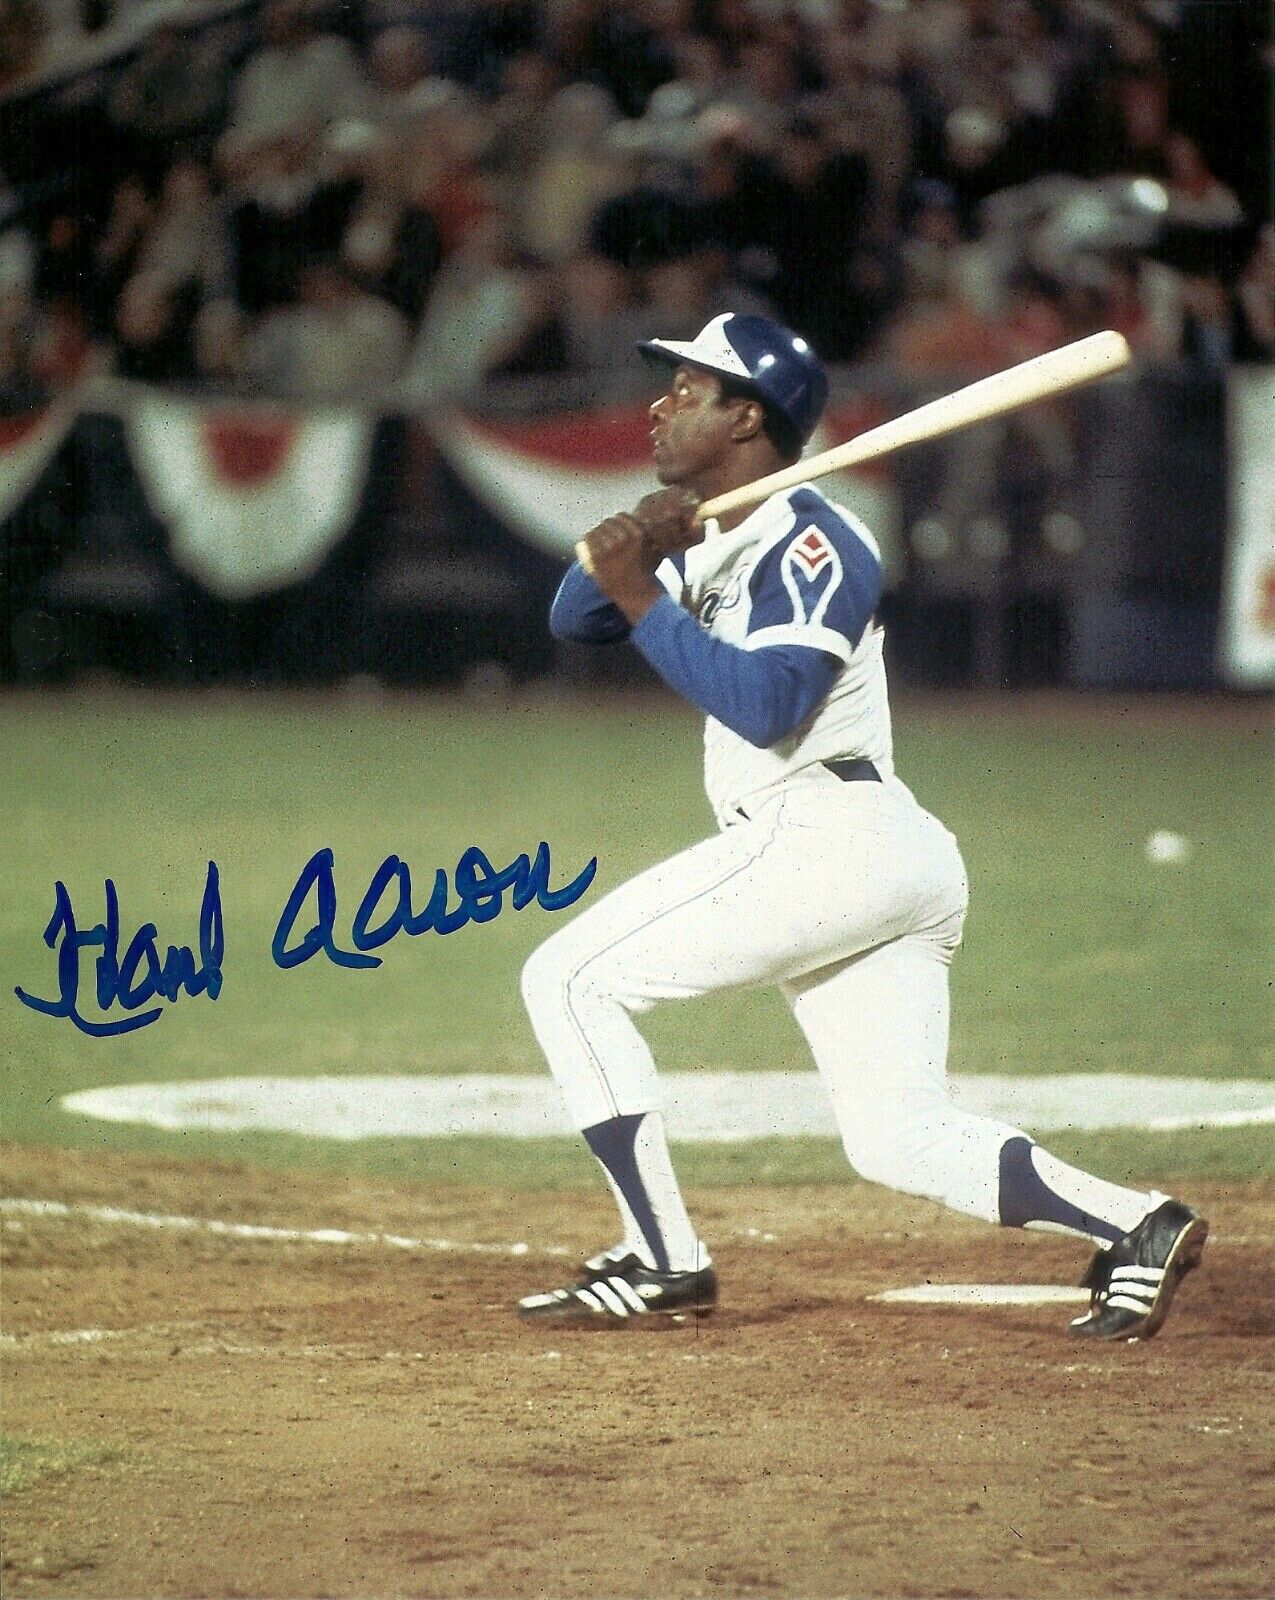 Hank Aaron Autographed Signed 8x10 Photo Poster painting ( HOF Braves ) REPRINT .